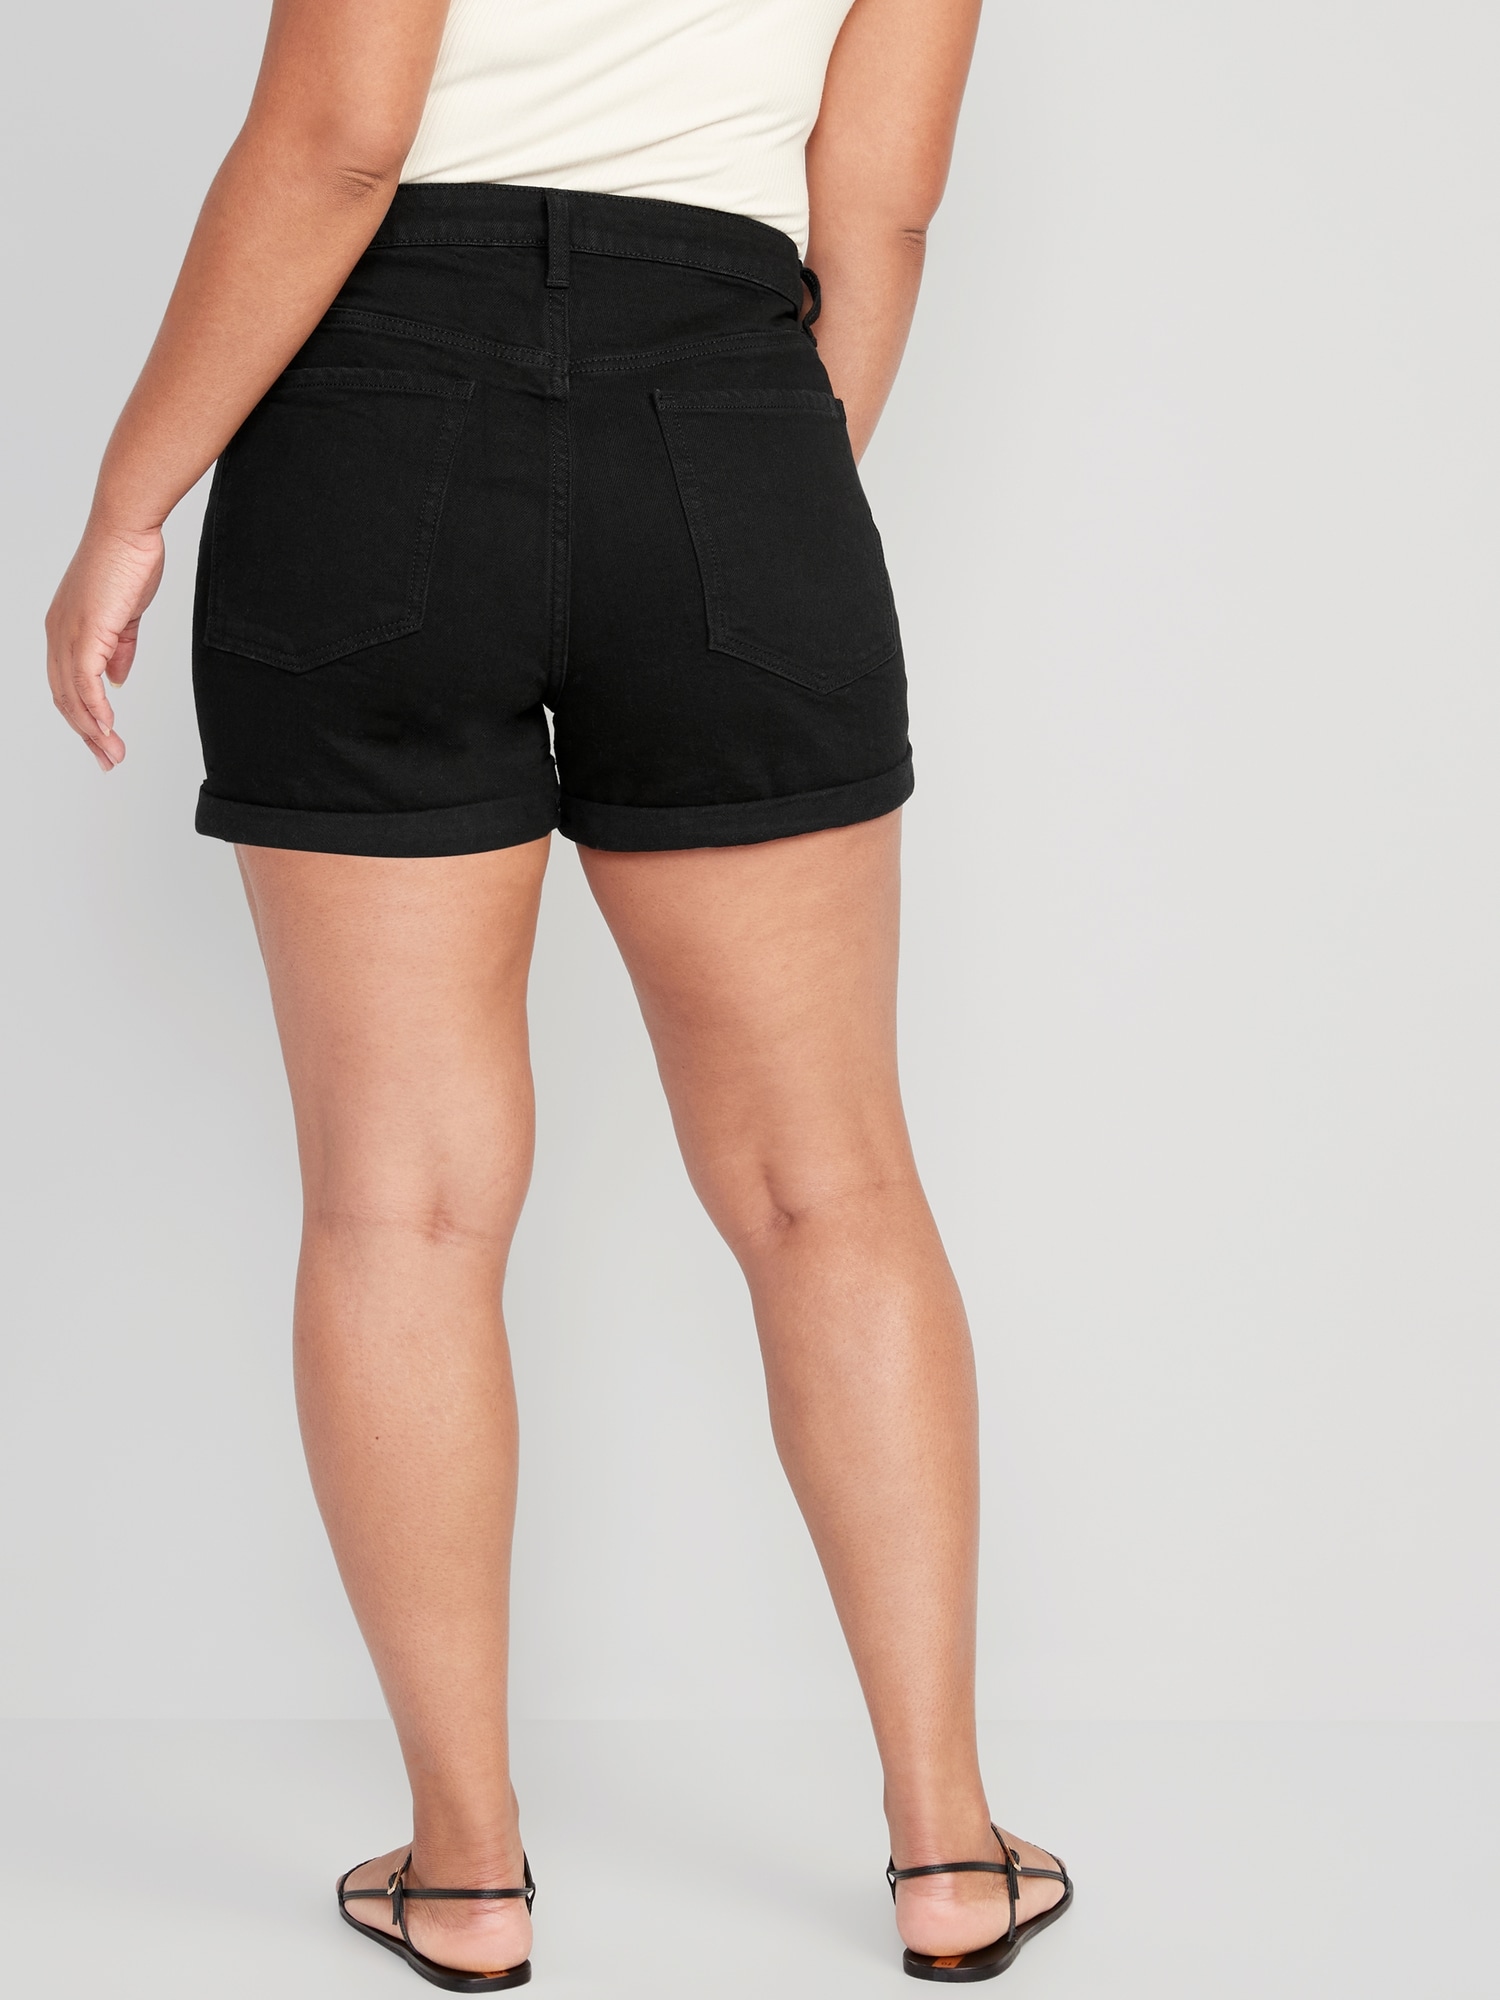 High-Waisted OG Cuffed Black Jean Shorts for -- inseam | Old Navy